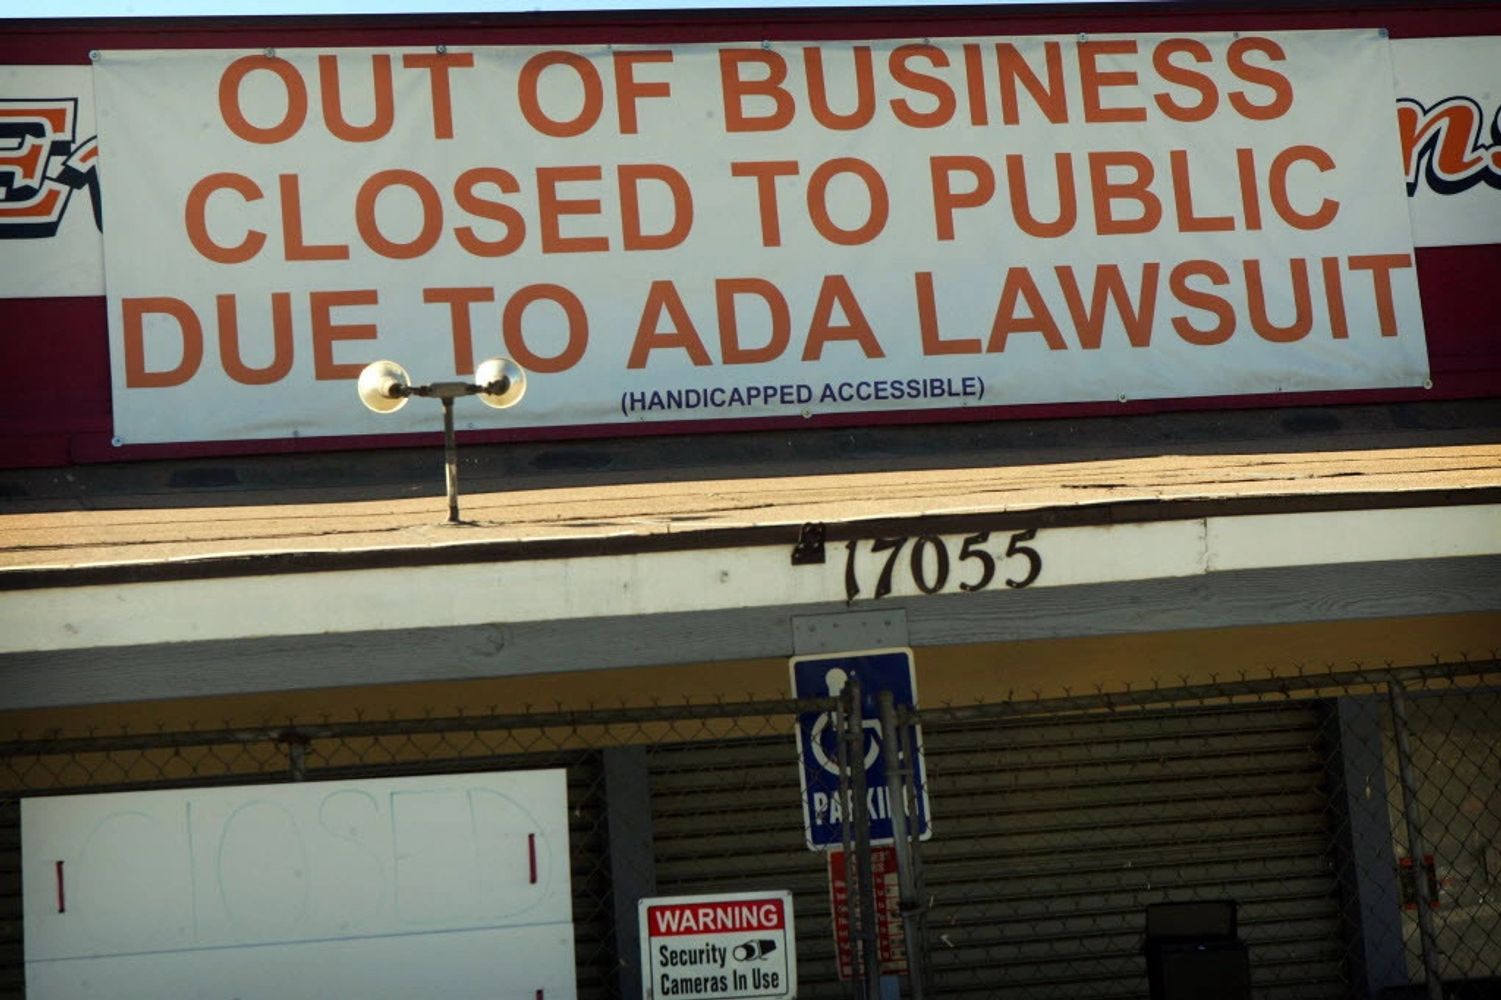 Business with sign closed due to ADA lawsuit